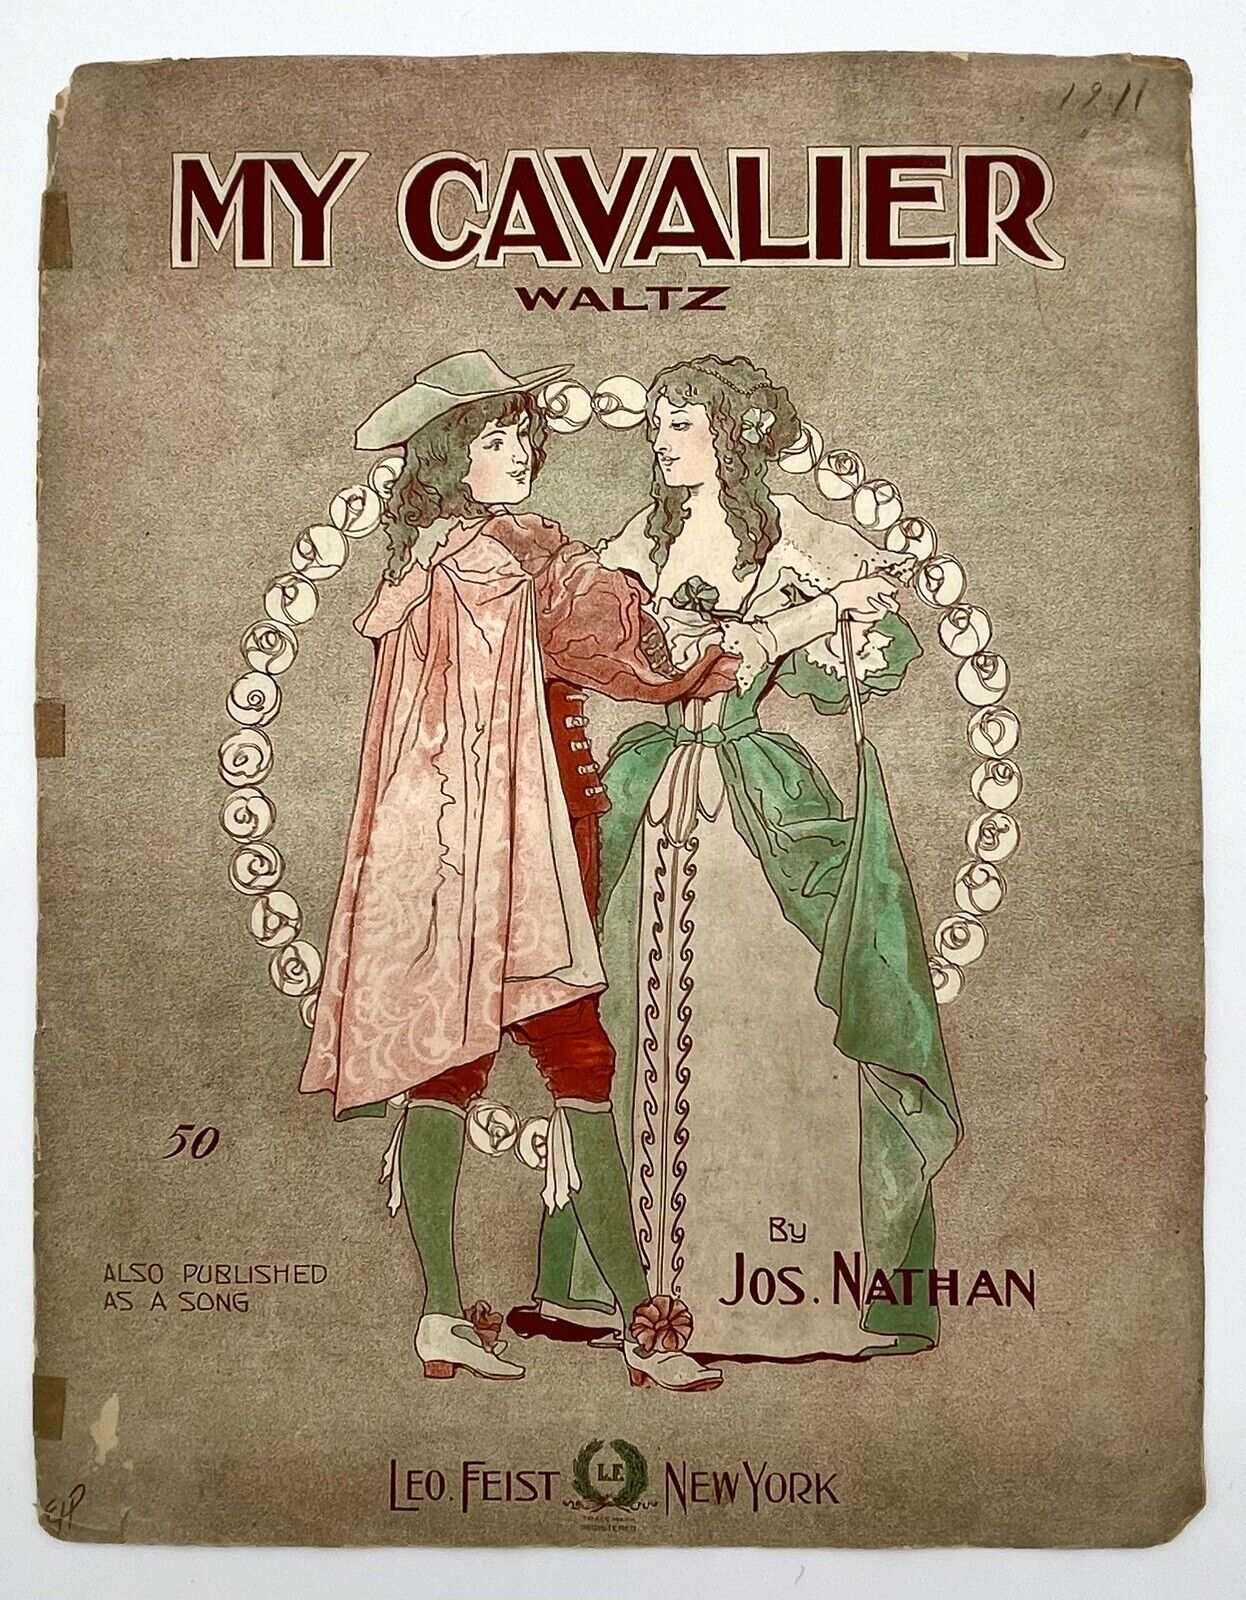 My Cavalier Waltz by Jos Nathan 1911 piano solo Cover art by E H Pfeiffer